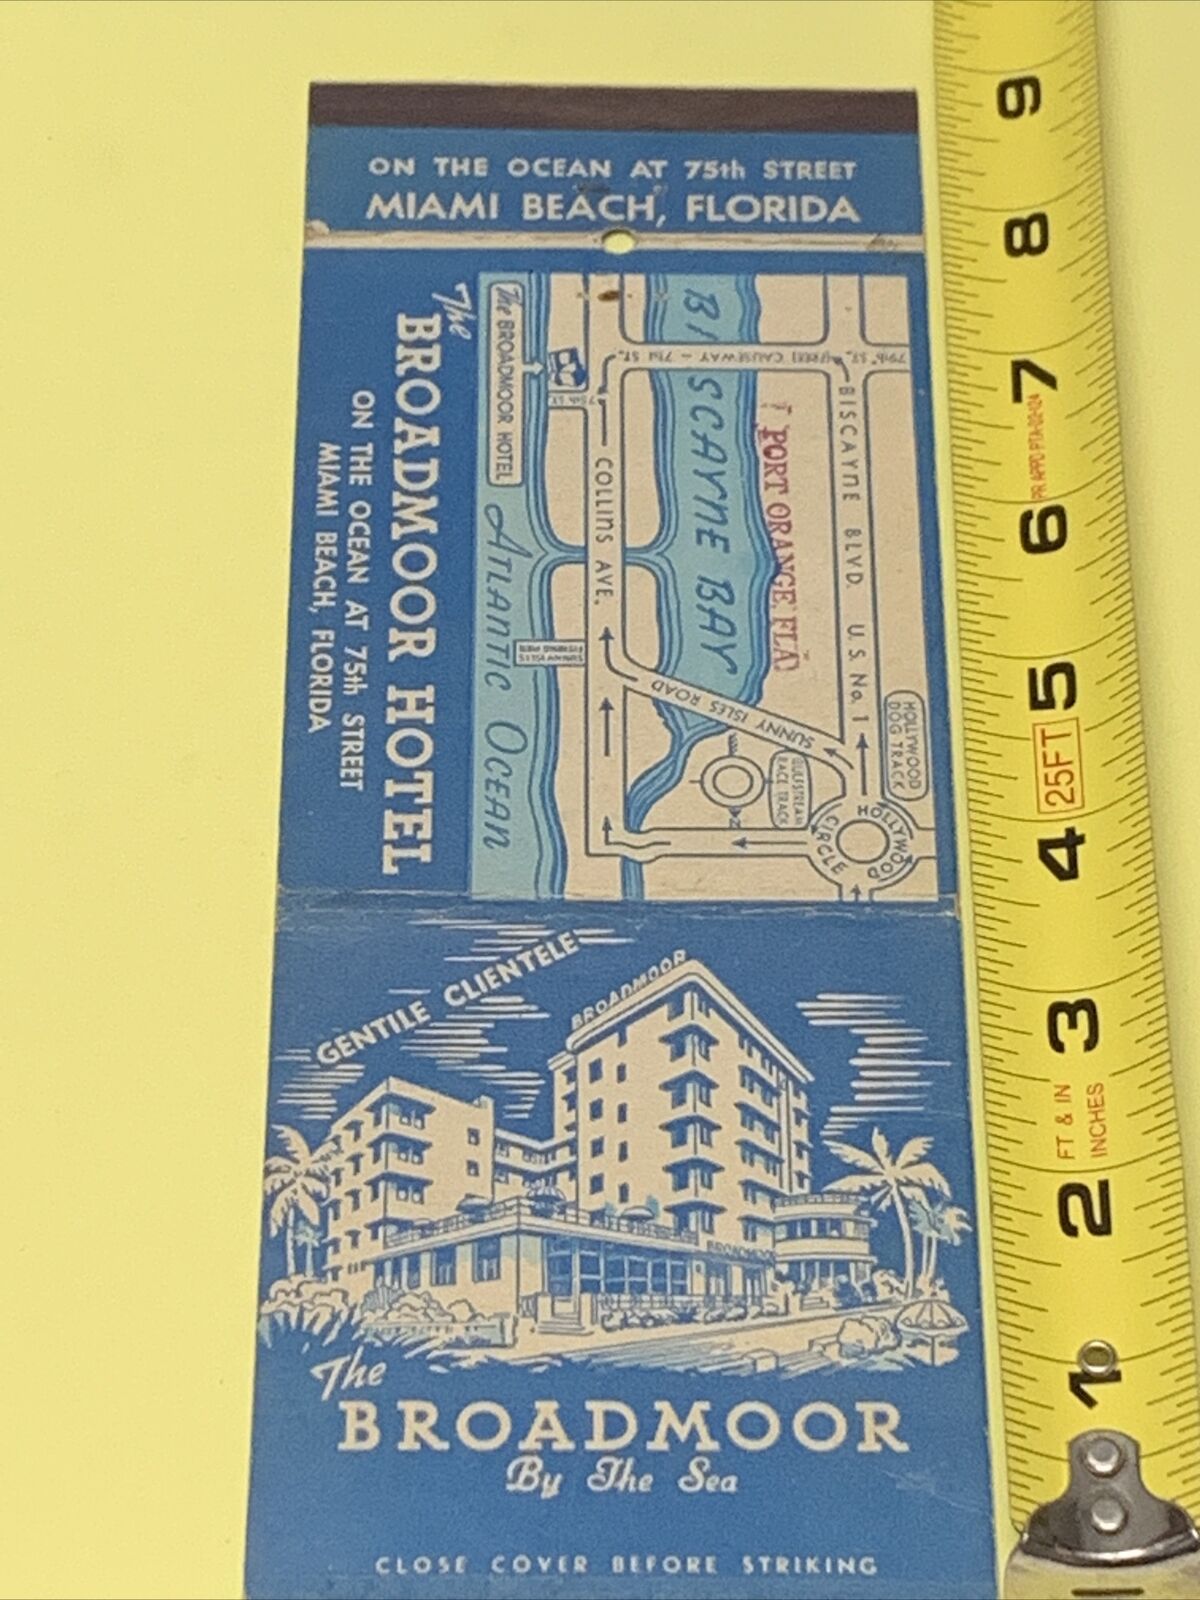 Vintage Giant Matchbook Cover   The Broadmore Hotel  Miami Beach,Fl gmg 9x3 1/4